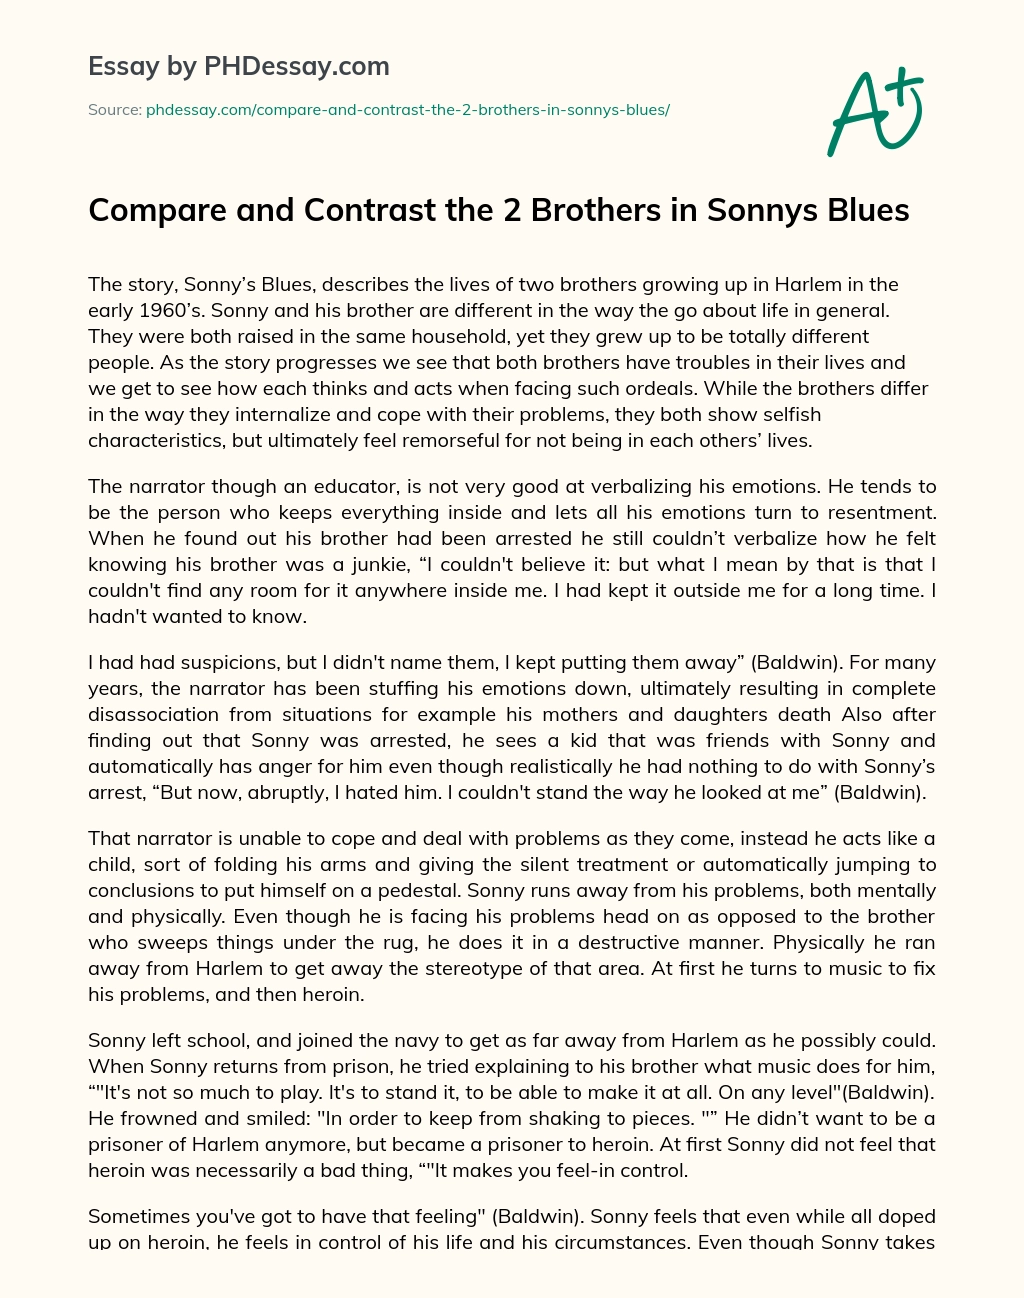 Compare and Contrast the 2 Brothers in Sonnys Blues essay